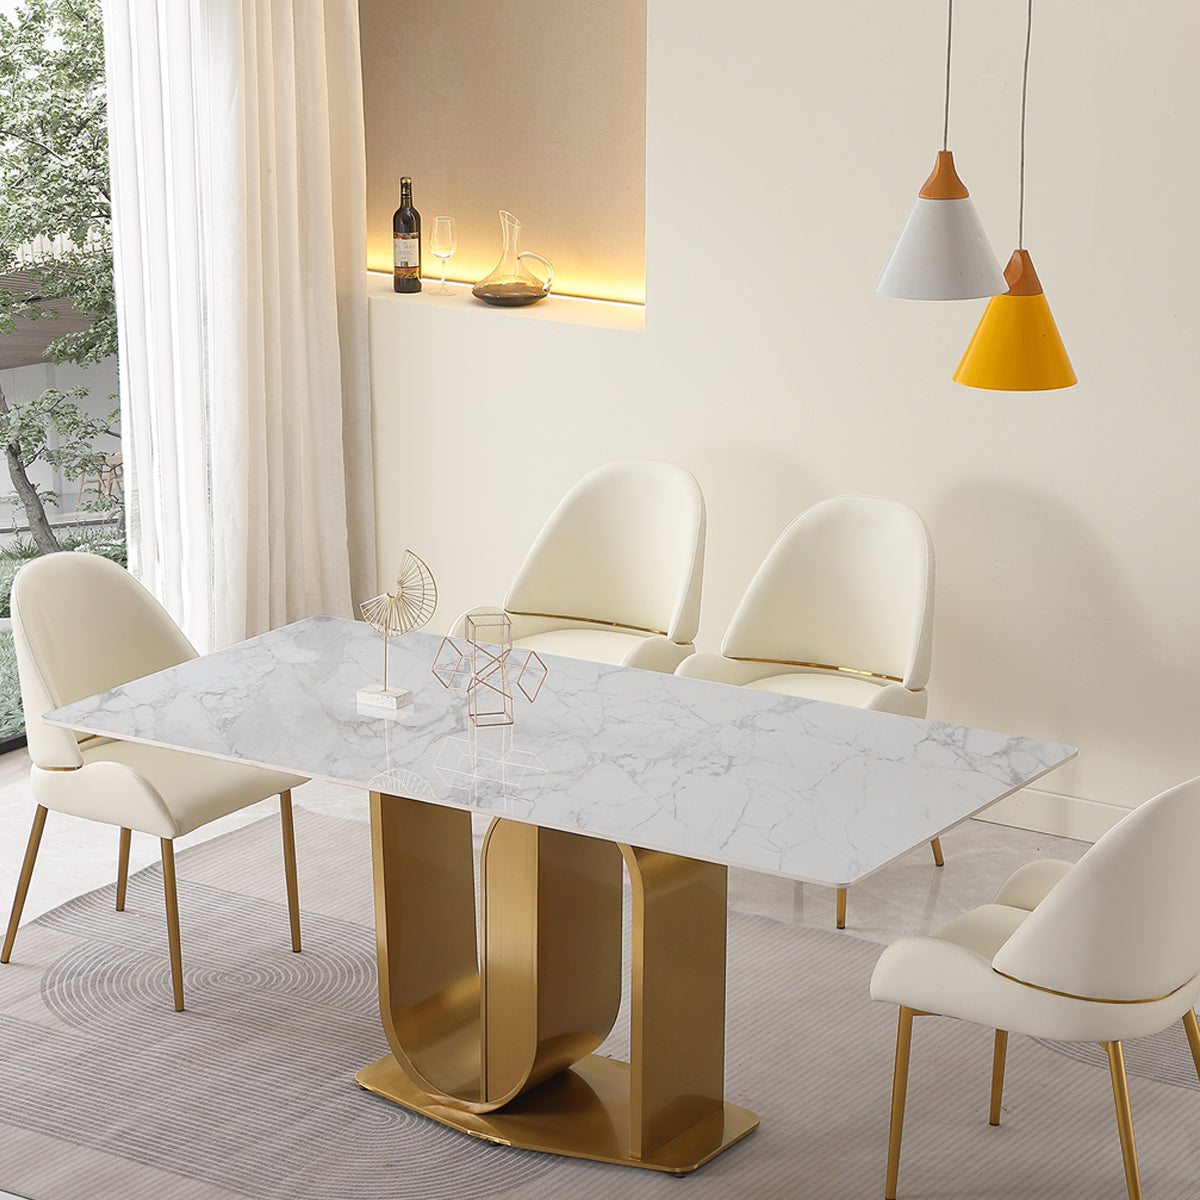 71" Contemporary Dining Table in Gold with Sintered Stone Top and  U shape Pedestal Base in Gold finish (chairs not included)